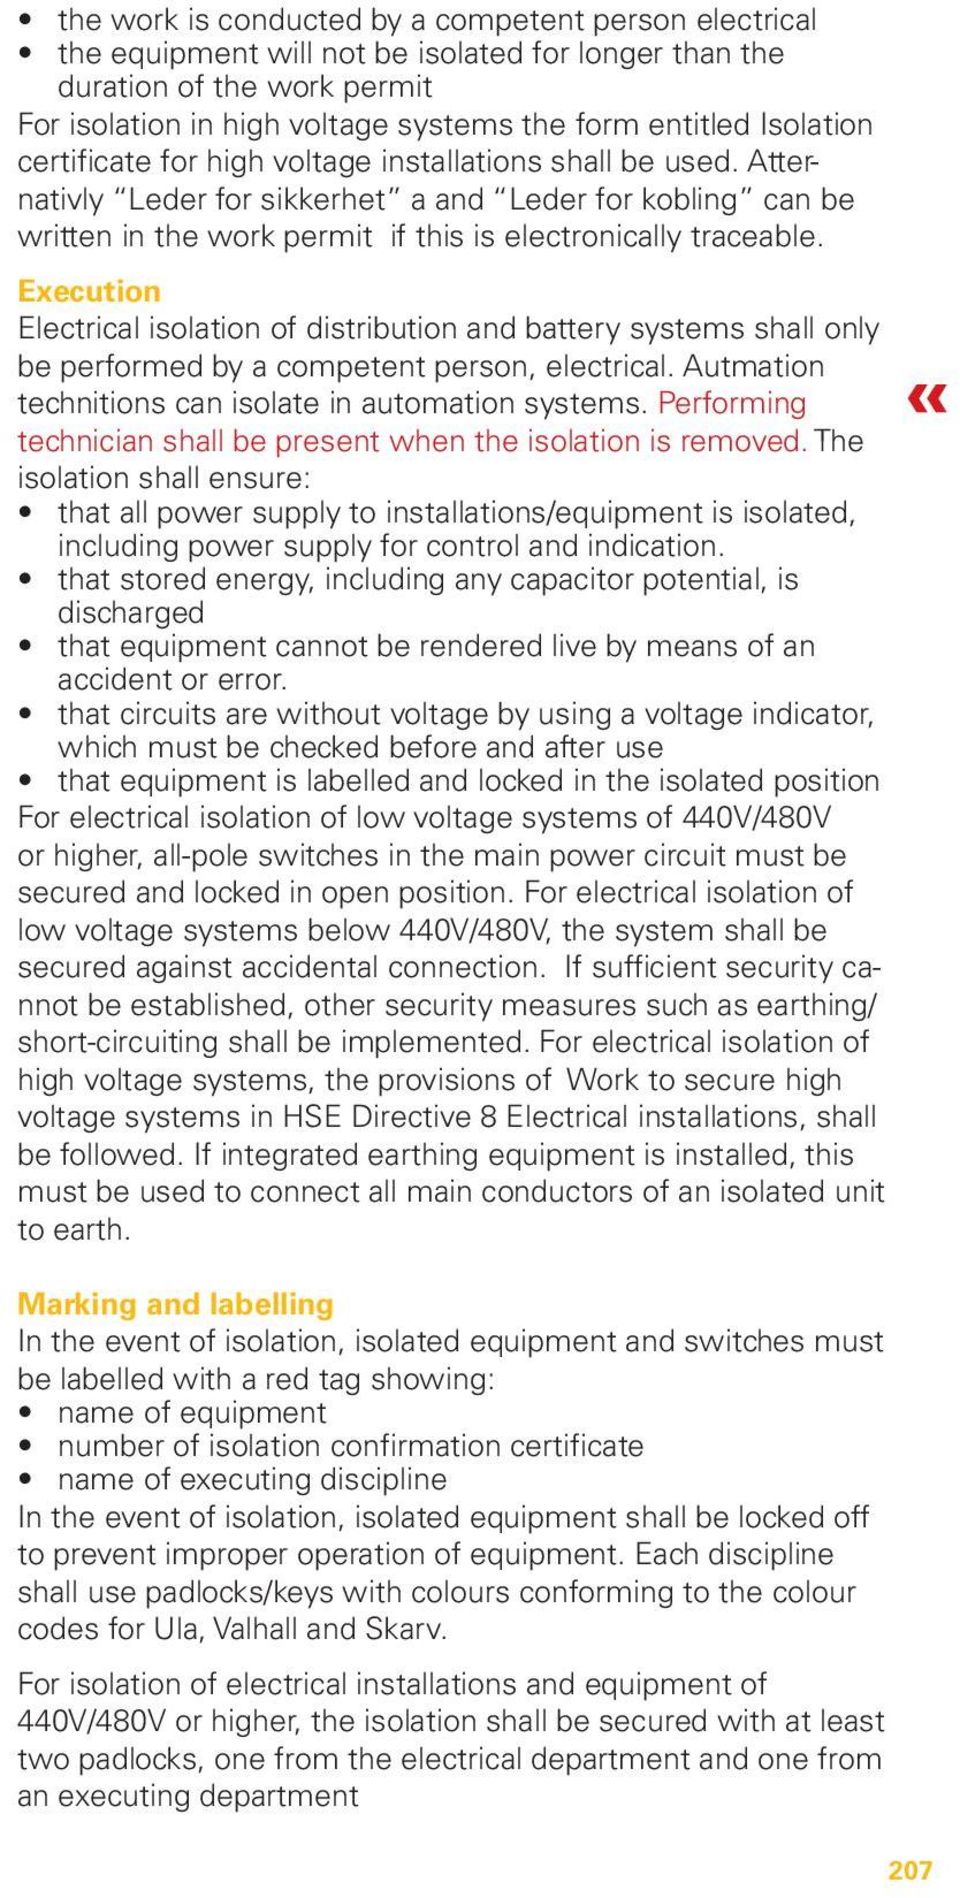 Execution Electrical isolation of distribution and battery systems shall only be performed by a competent person, electrical. Autmation technitions can isolate in automation systems.